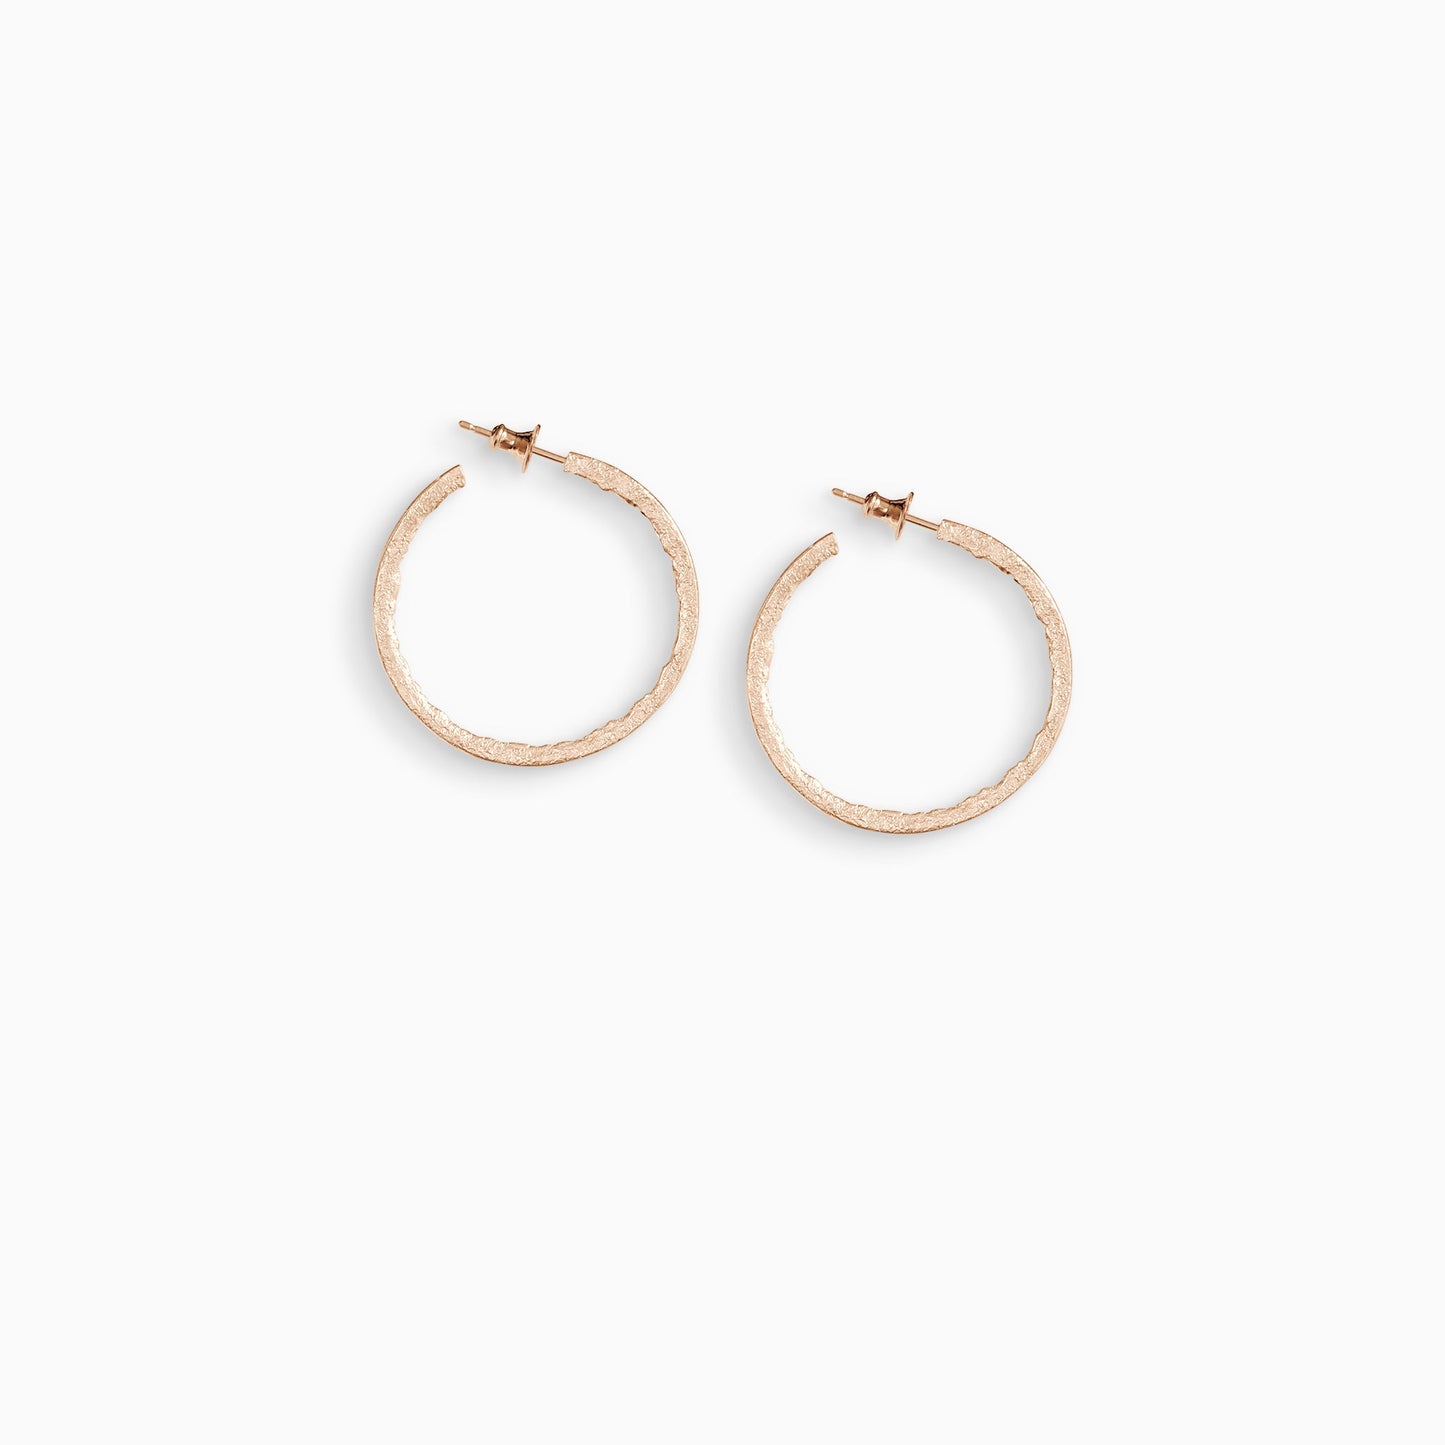 A pair of 18ct Fairtrade rose gold  round hoop earrings with a stud fastening. Smooth outside edge, fragmented inside edges. 36mm outside diameter.